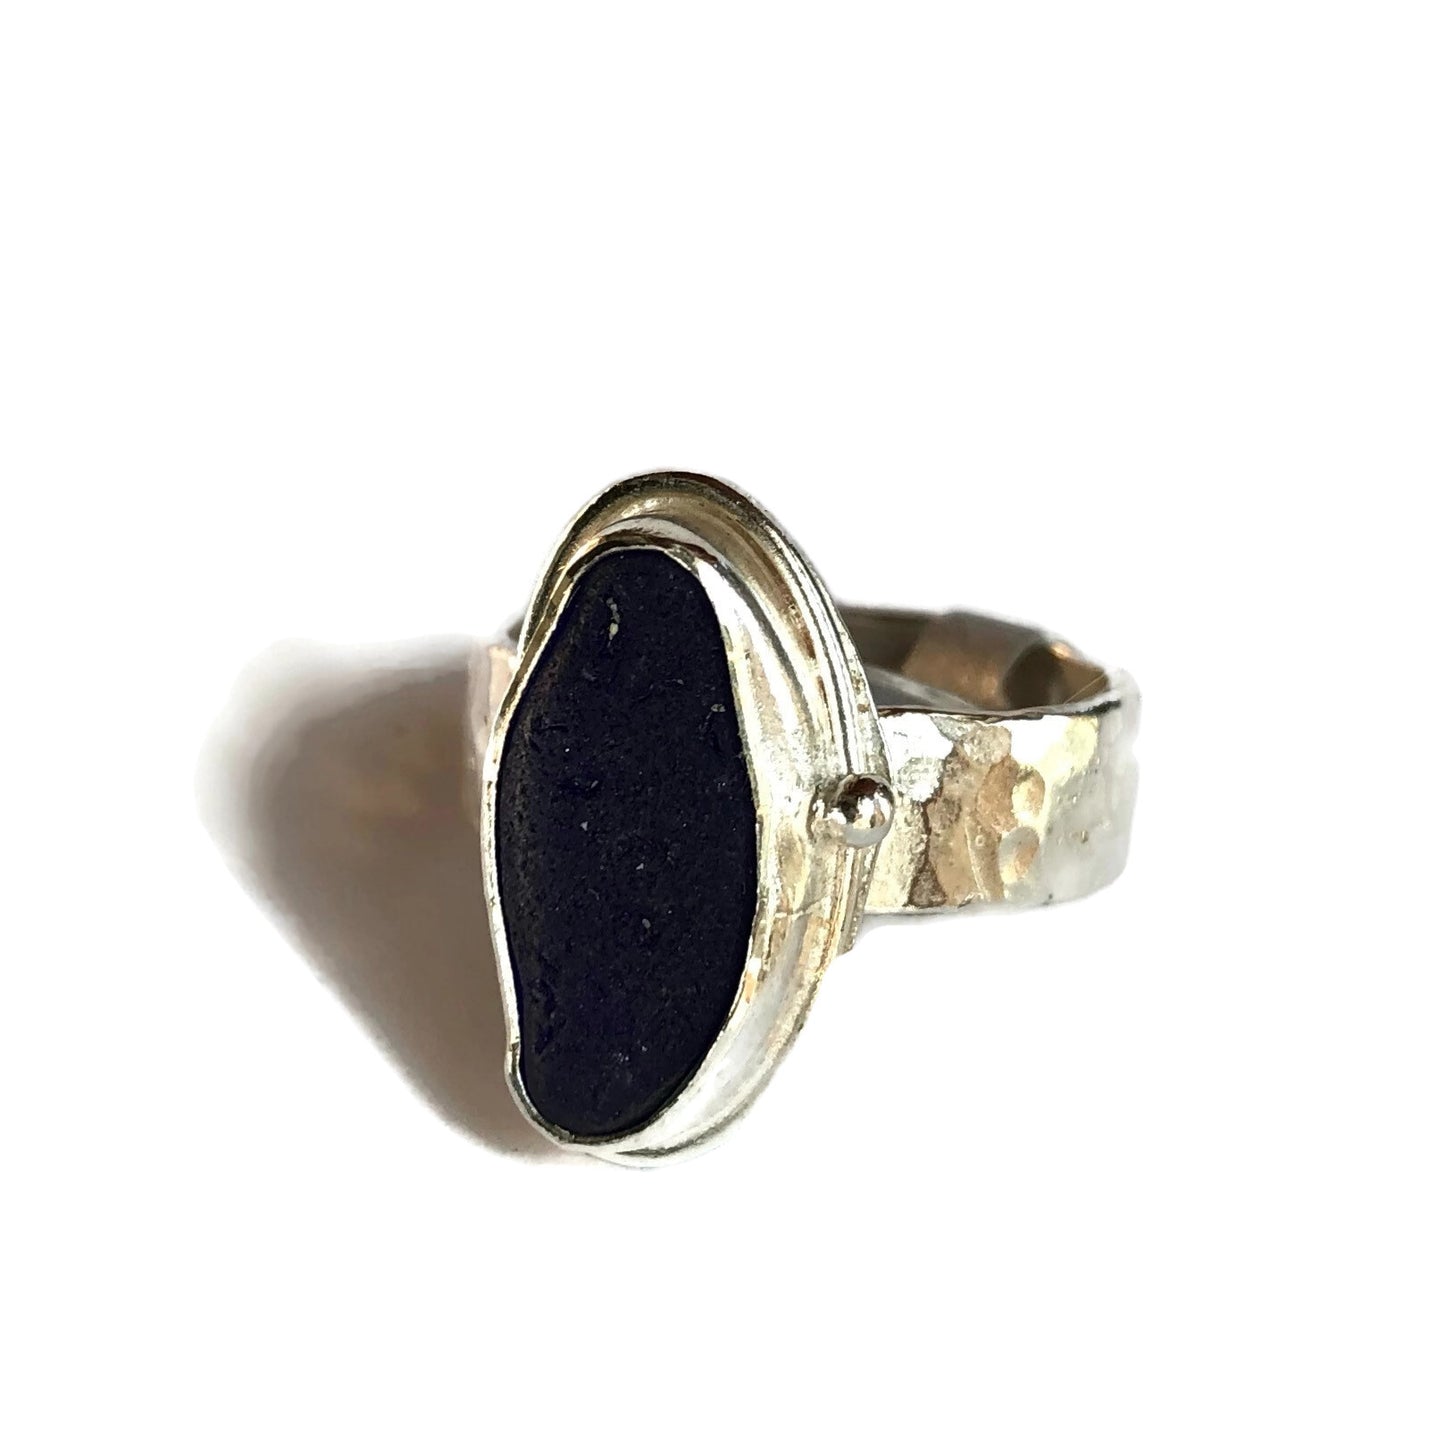 Cobalt Sea Glass Ring with Textured Silver Band